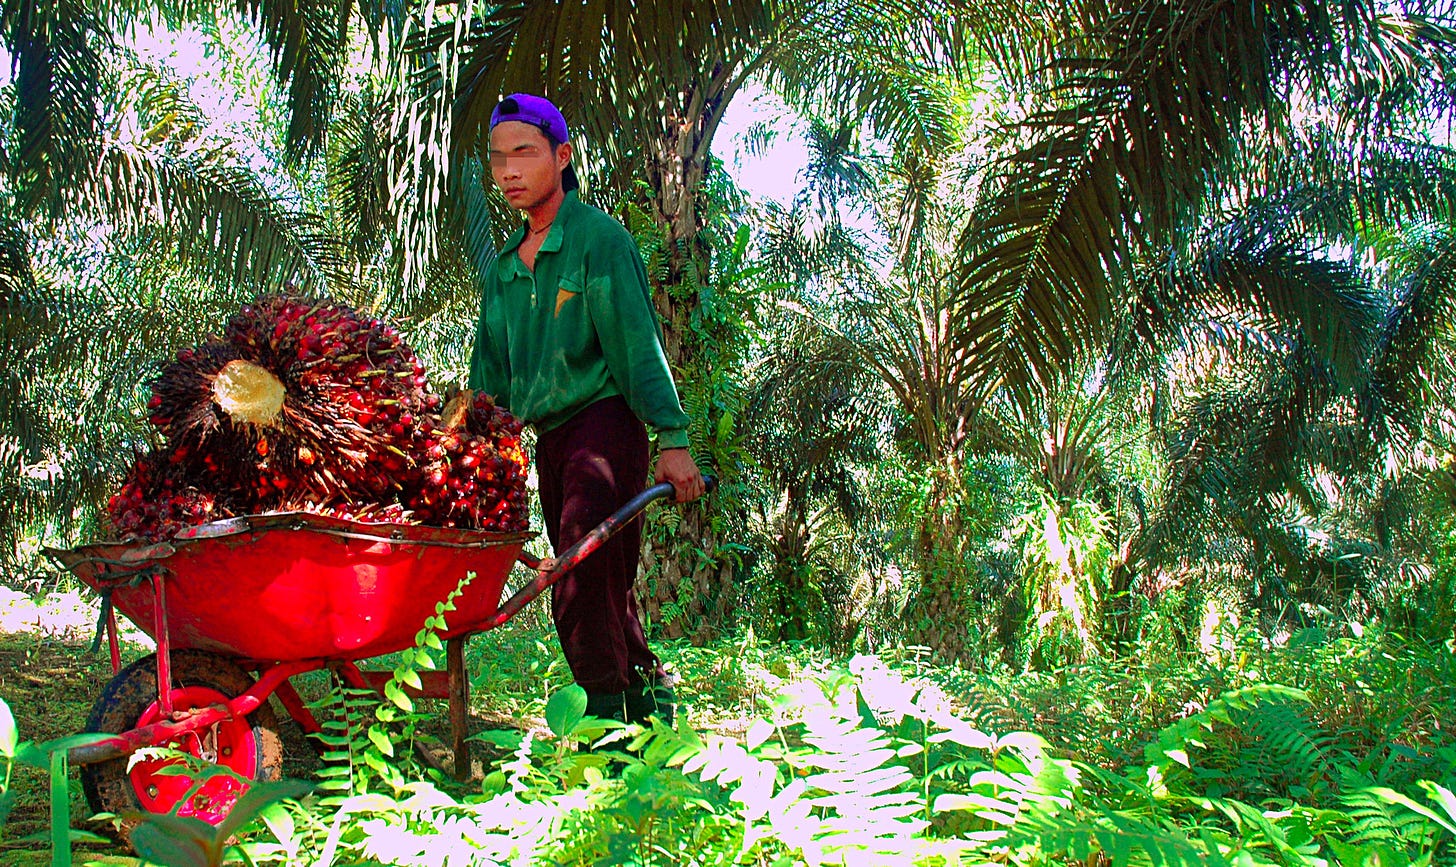 A young underage person pushes a red wheelbarrow loaded with palm nuts through a lush green forest on a bright and sunny day. The laborer is a slight person with brown skin and a green long sleeved shirt.